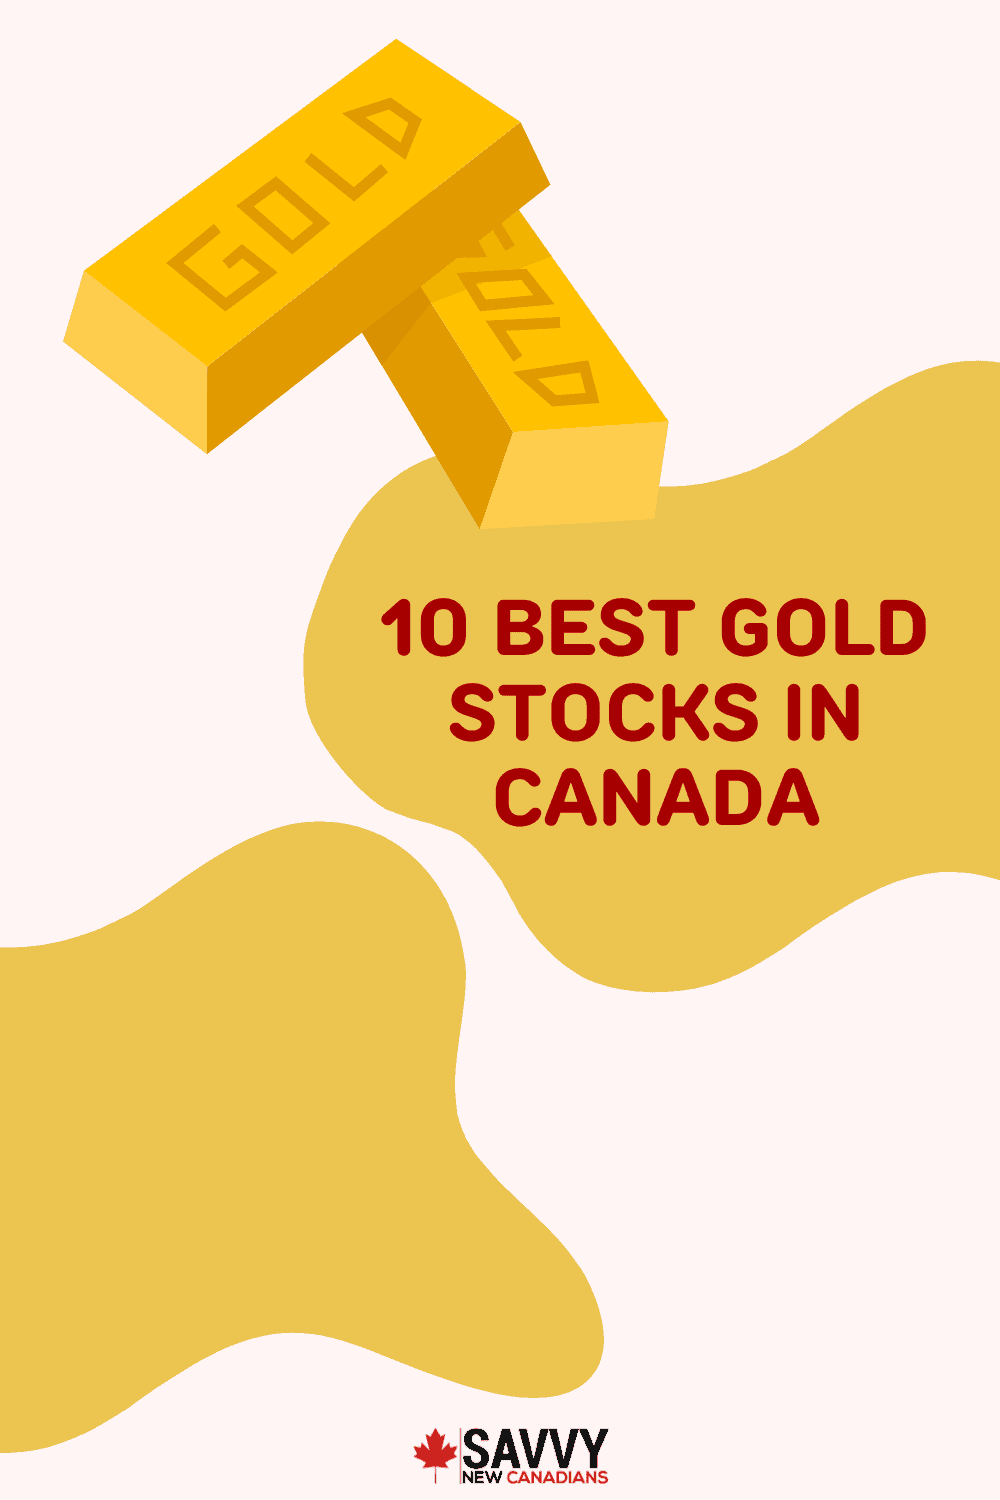 10 Best Gold Stocks in Canada for 2022